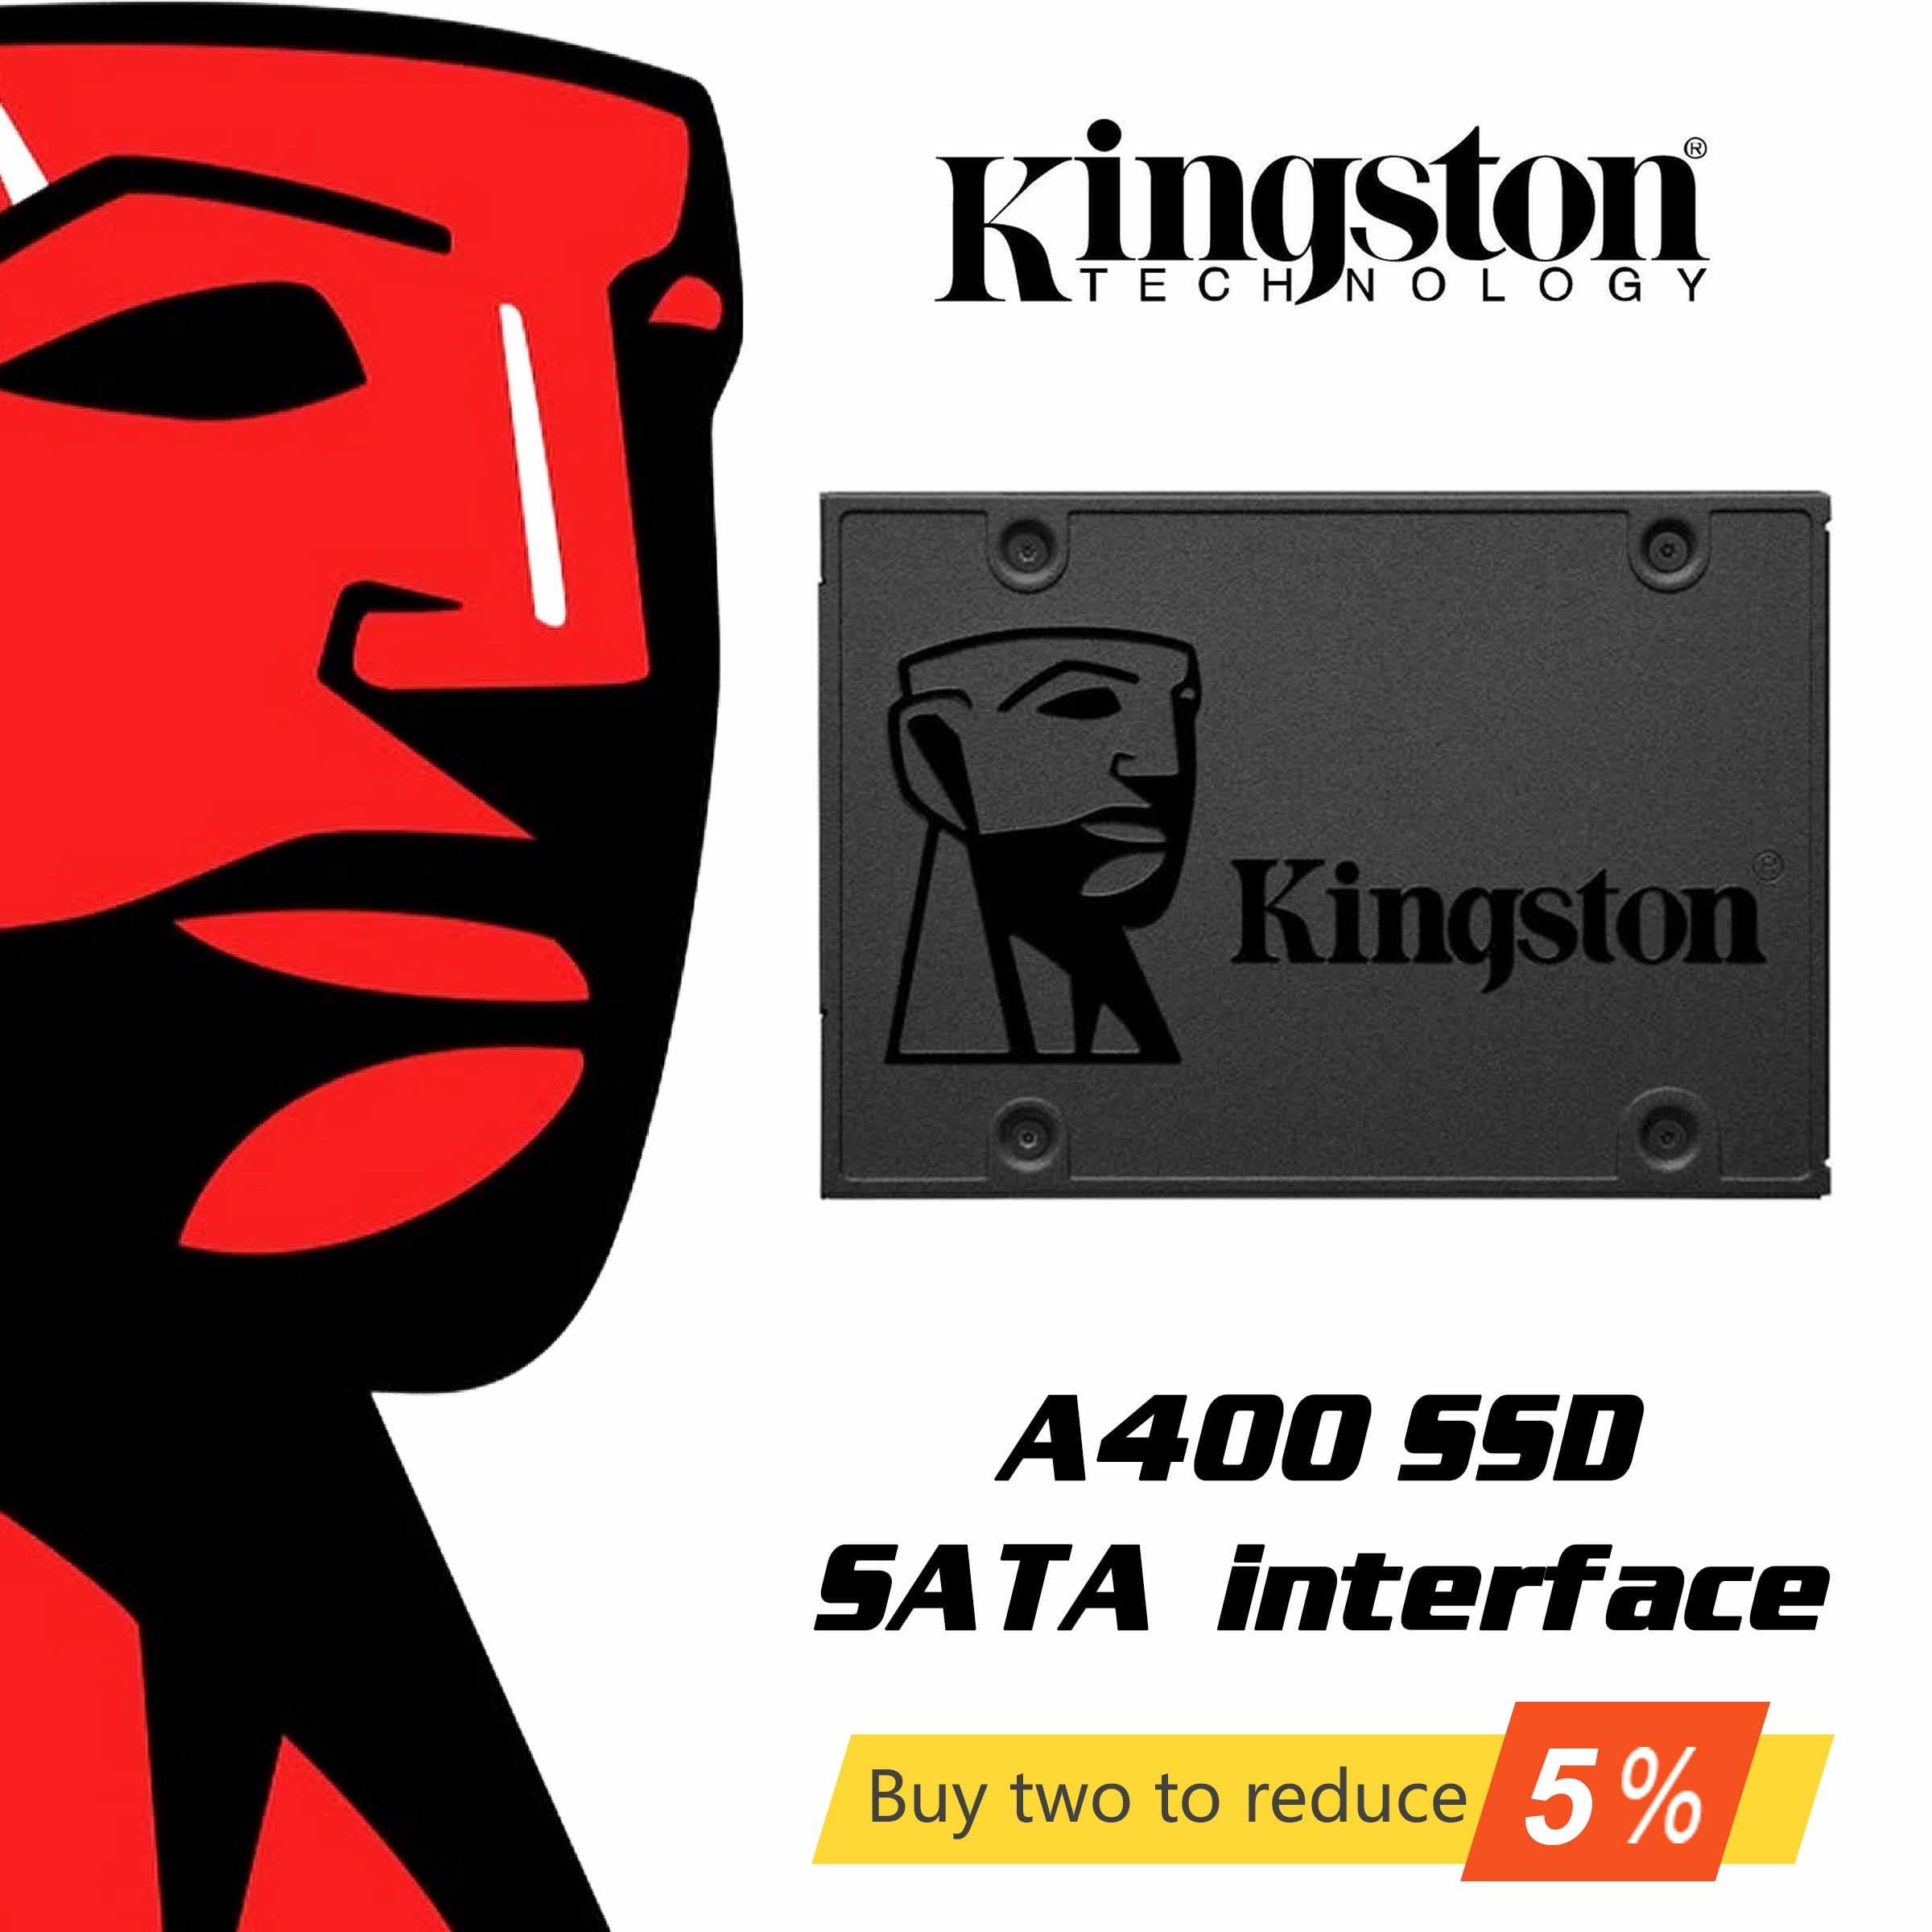 shop with crypto buy Original Kingston A400 SSD SATA3 2.5 inch 240GB 480GB Internal Solid State Drive HDD Hard Drive Disk SSD For PC Laptop Computer pay with bitcoin